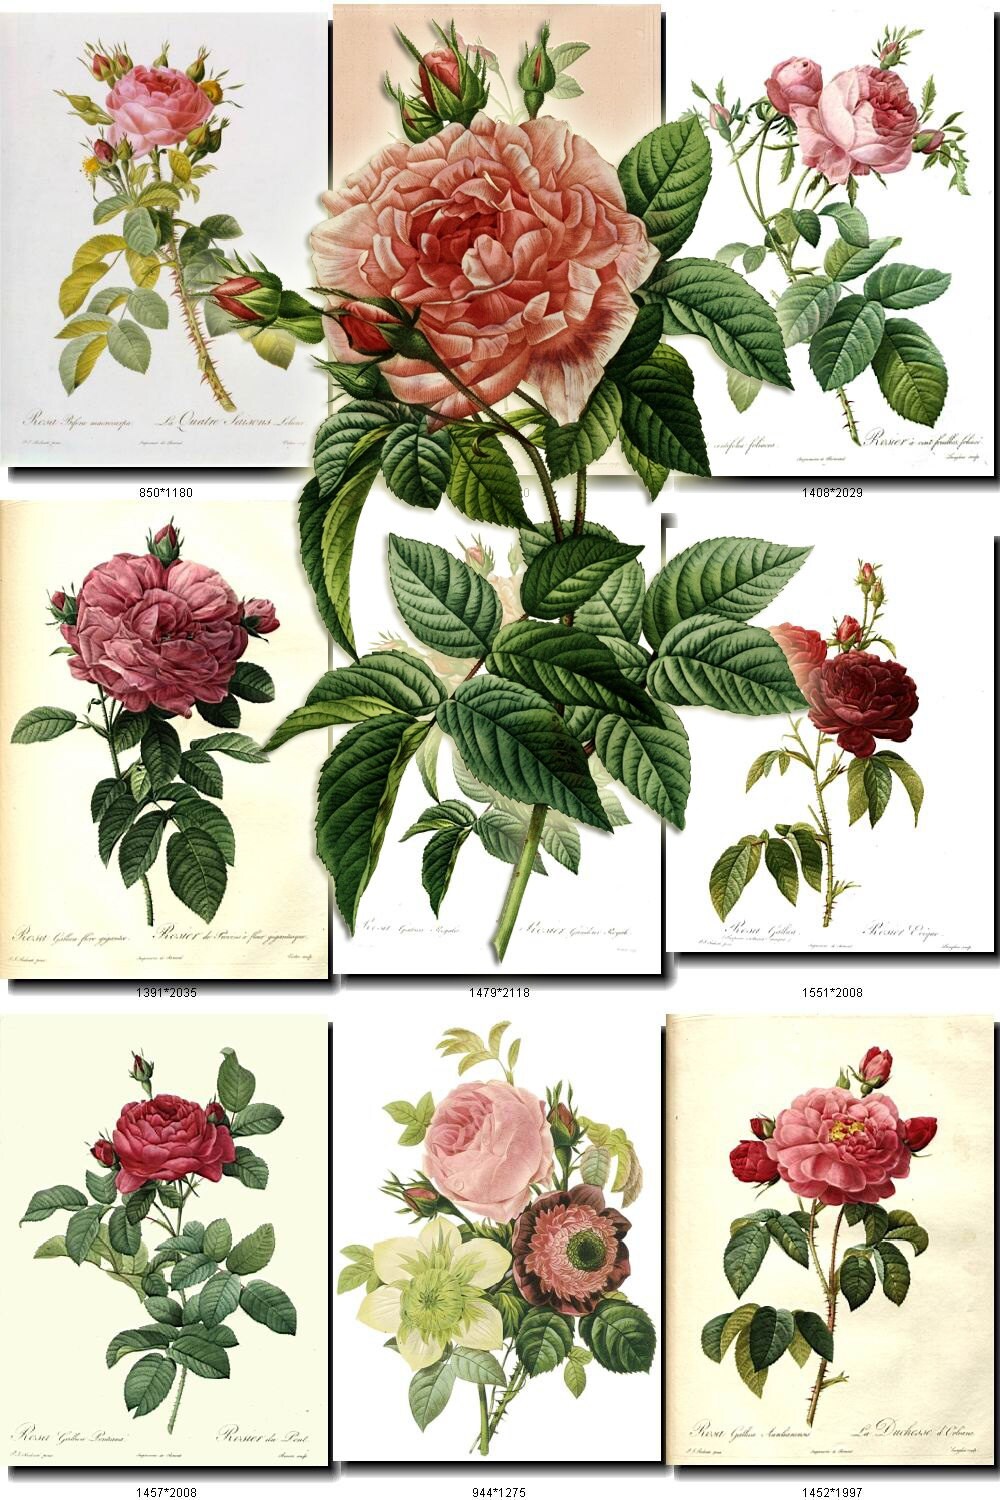 ROSES-1 and LILIES Collection of 80 vintage images pedants | Etsy